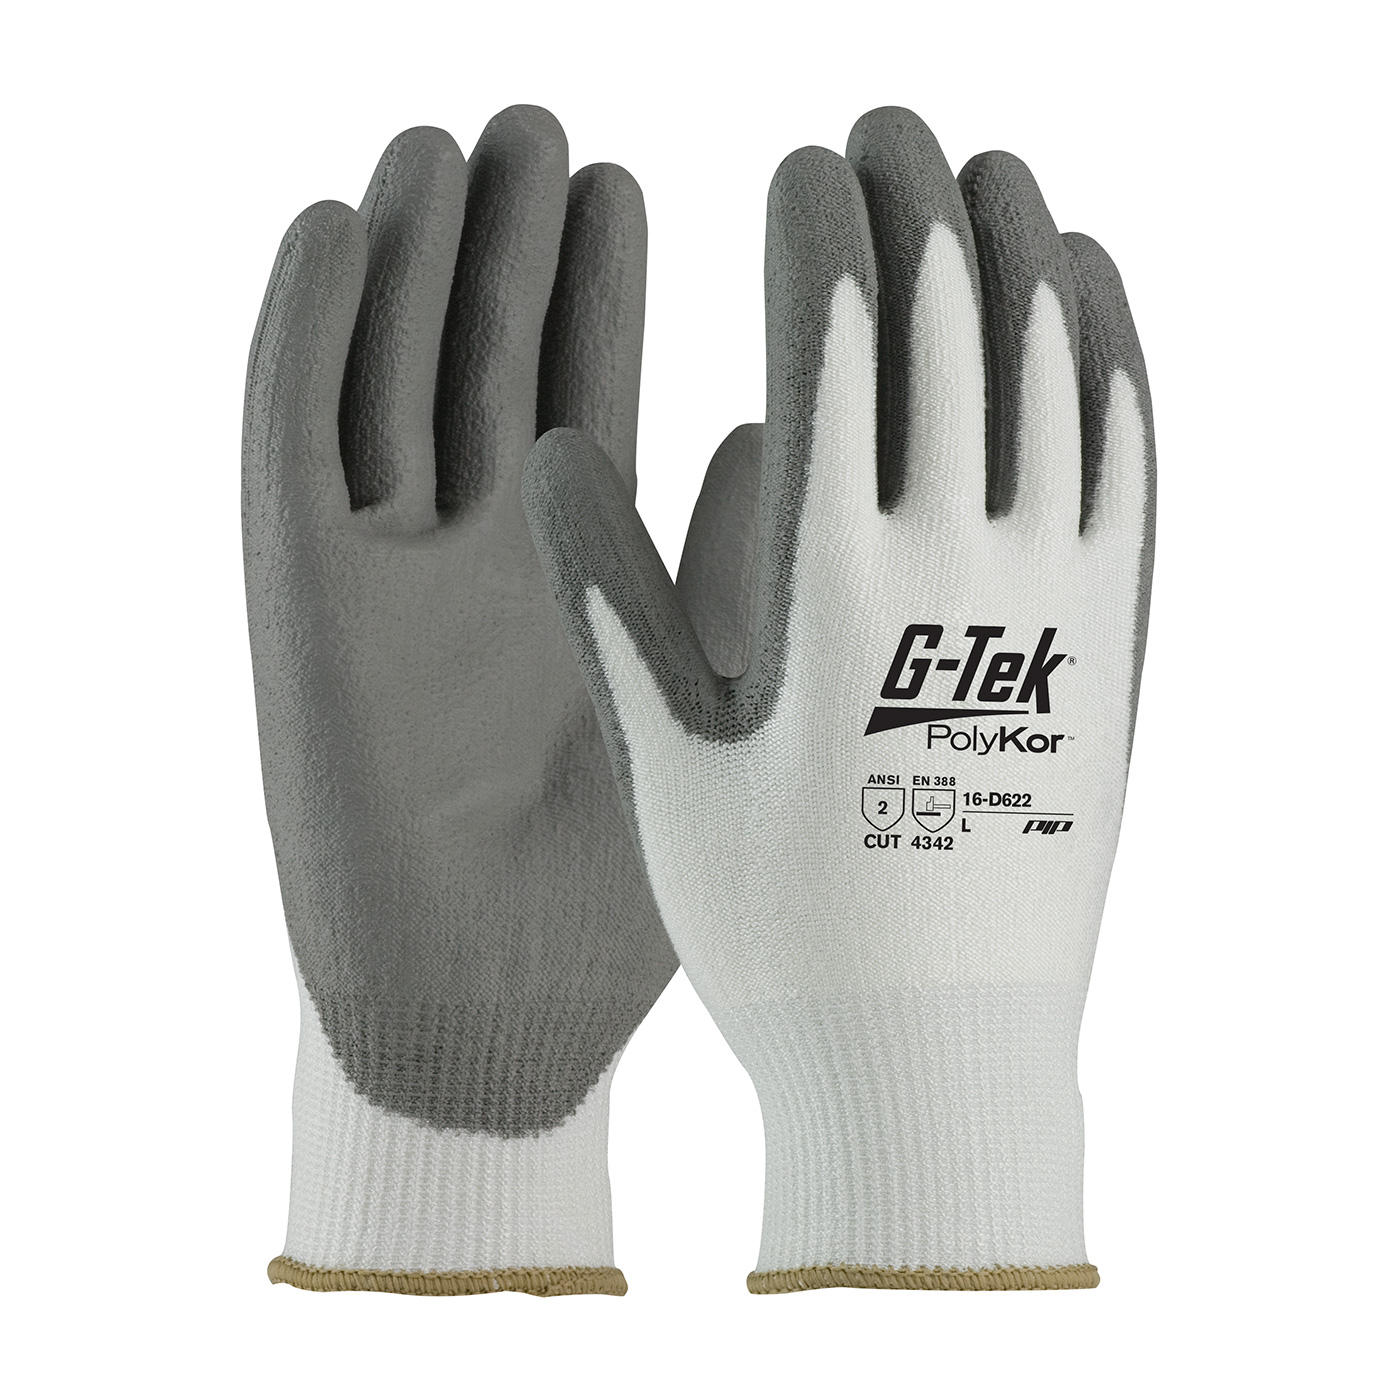 PIP 16-D622/M G-Tek PolyKor Seamless Knit PolyKor Blended Glove with Polyurethane Coated Smooth Grip on Palm & Fingers - Medium PID-16 D622 M